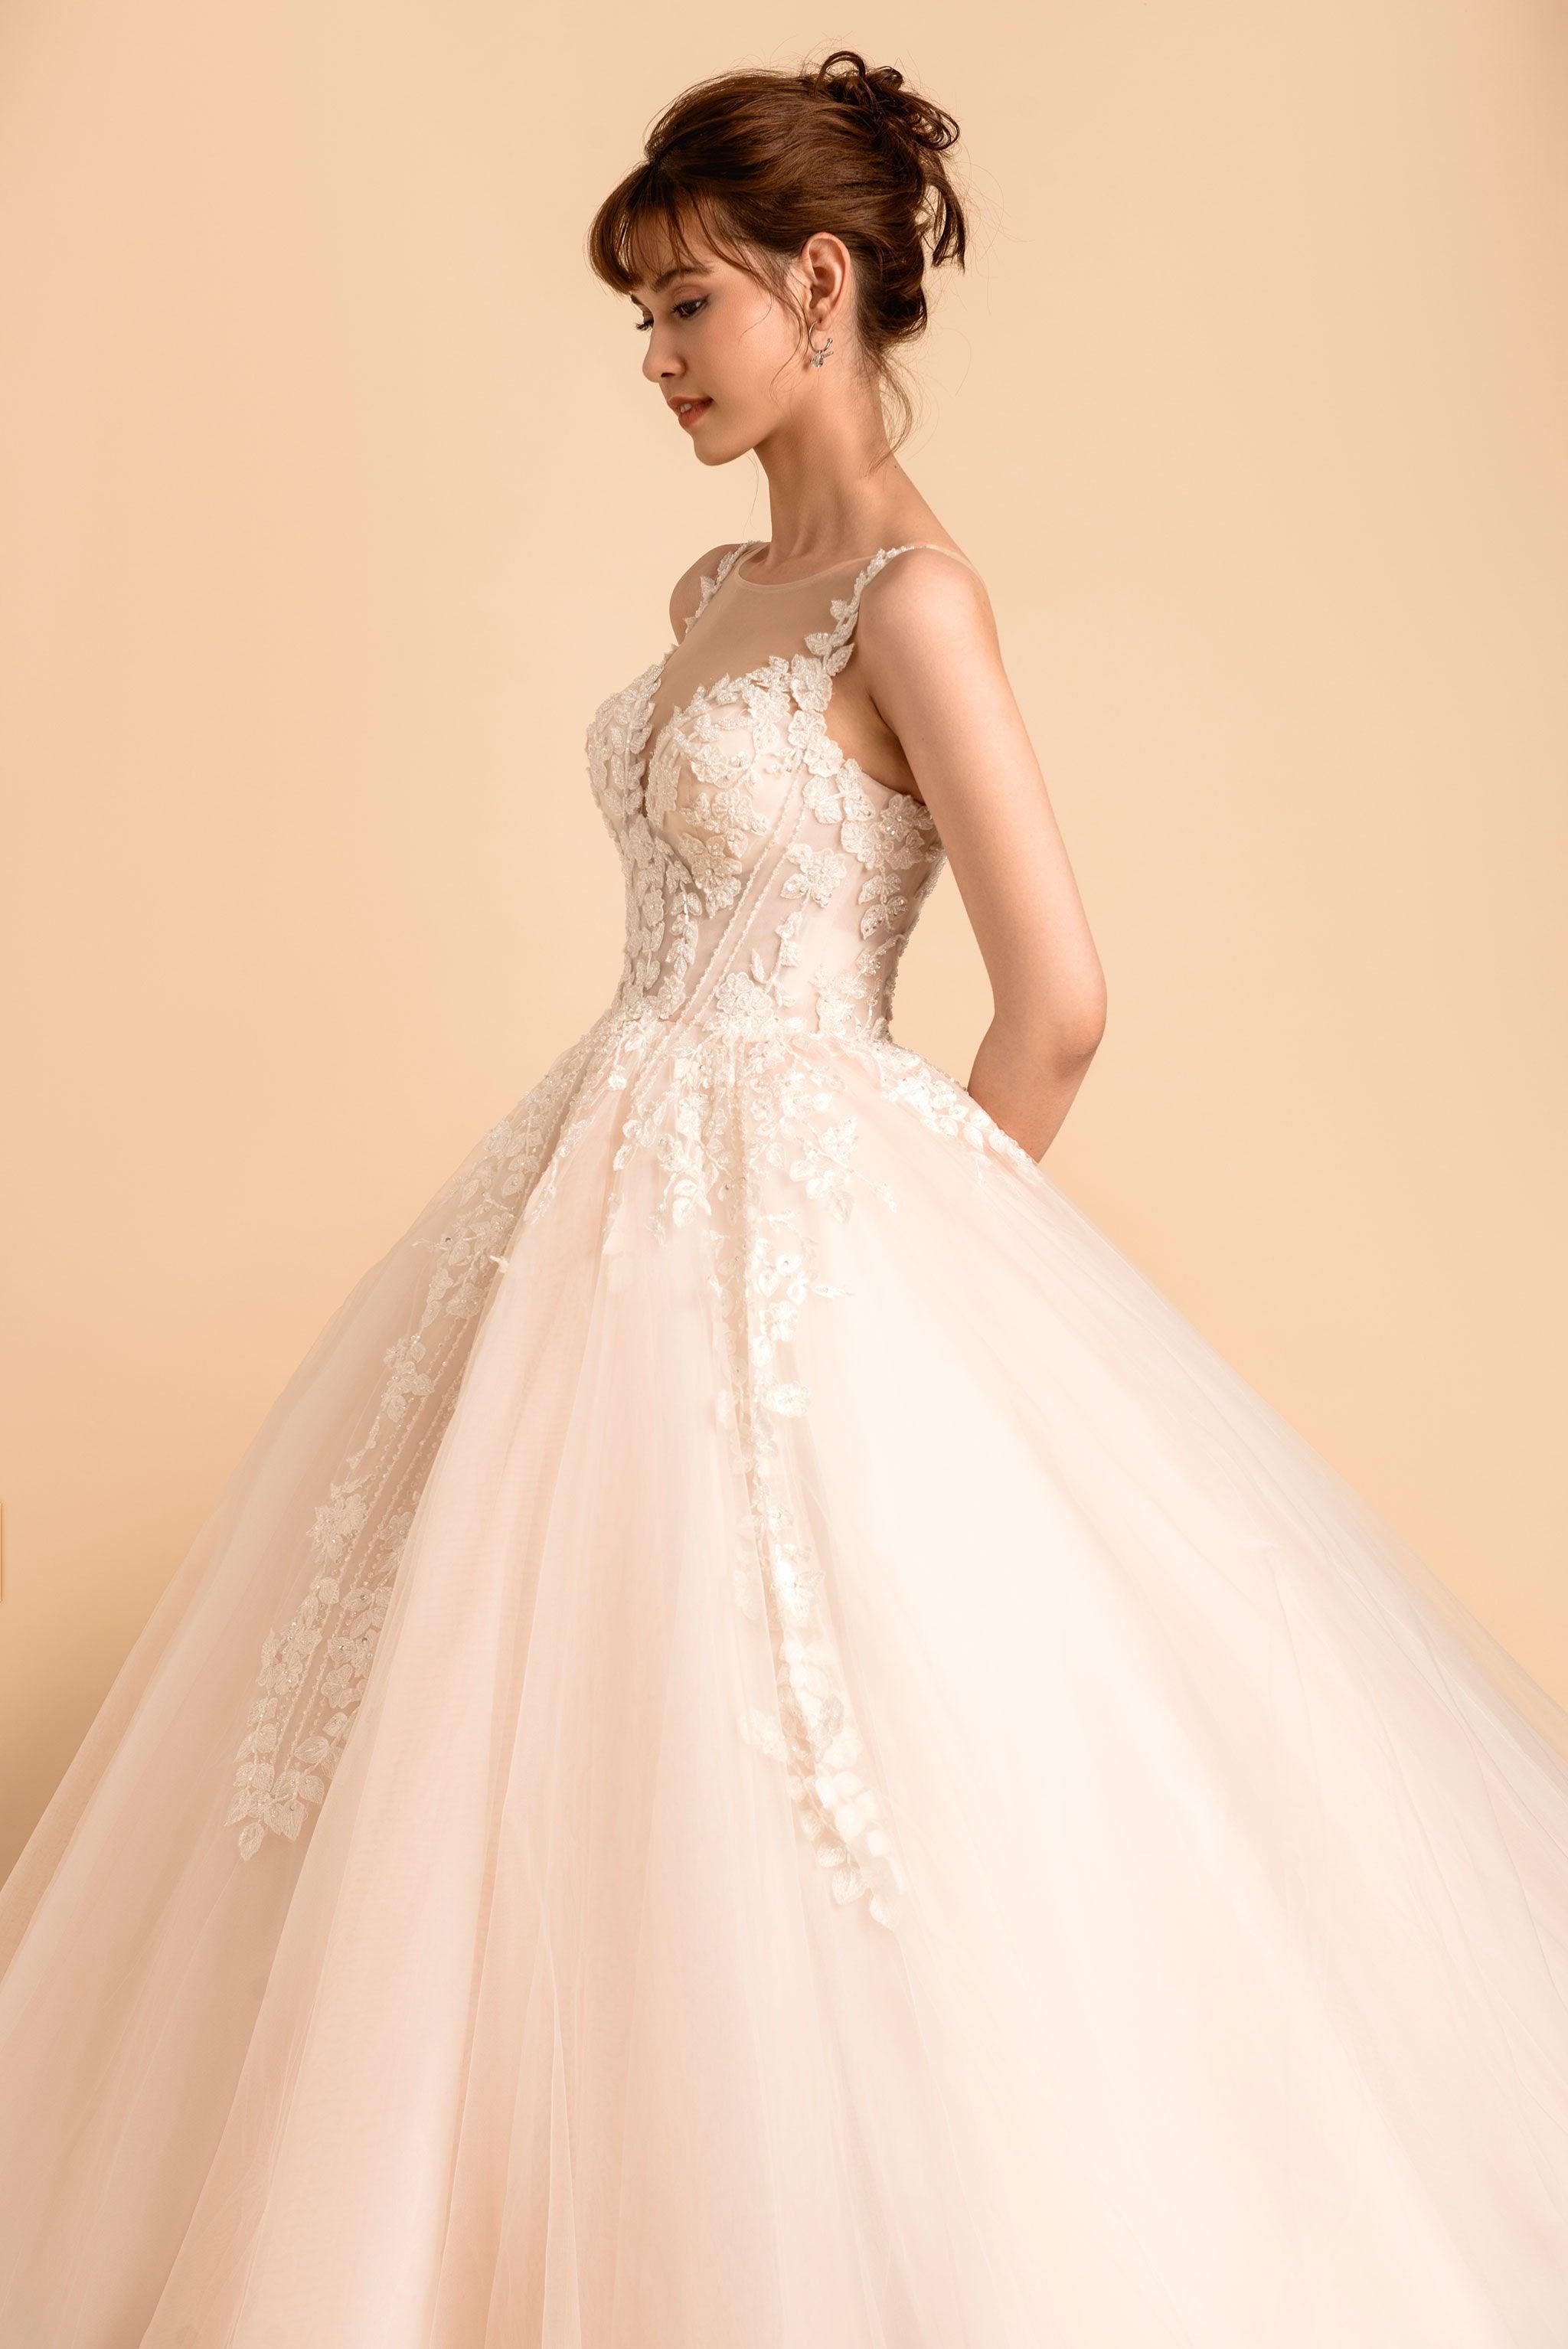 Princess Ball Gown | Sweetheart Neckline Ball Gown | Dare and Dazzle